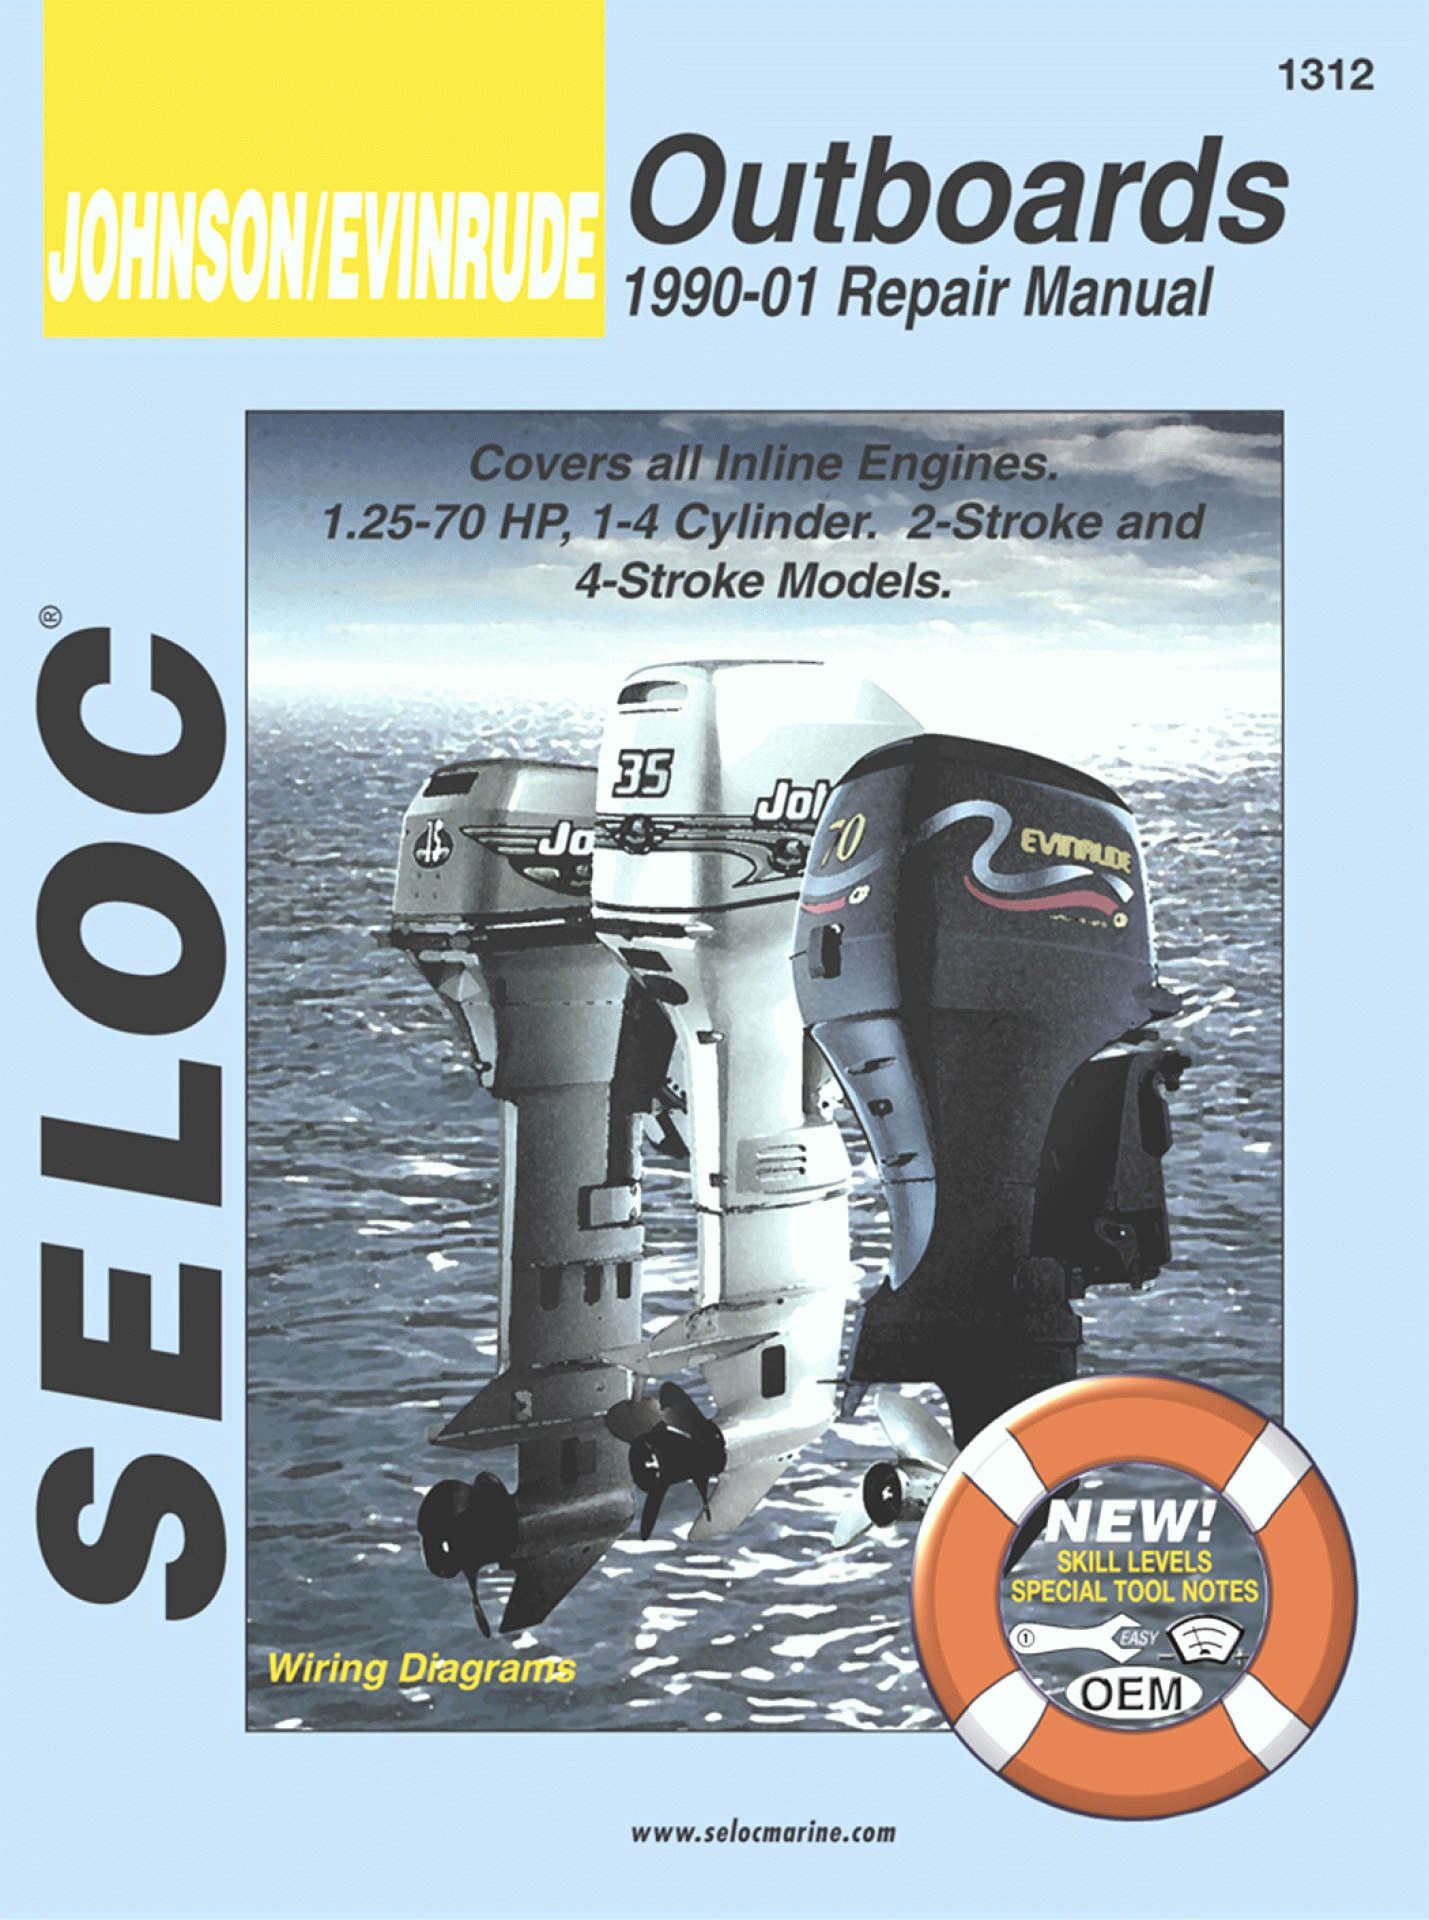 SELOC PUBLISHING | 18-01312 | REPAIR MANUAL Johnson/Evinrude Outboards - All Inline Engines 1990-01